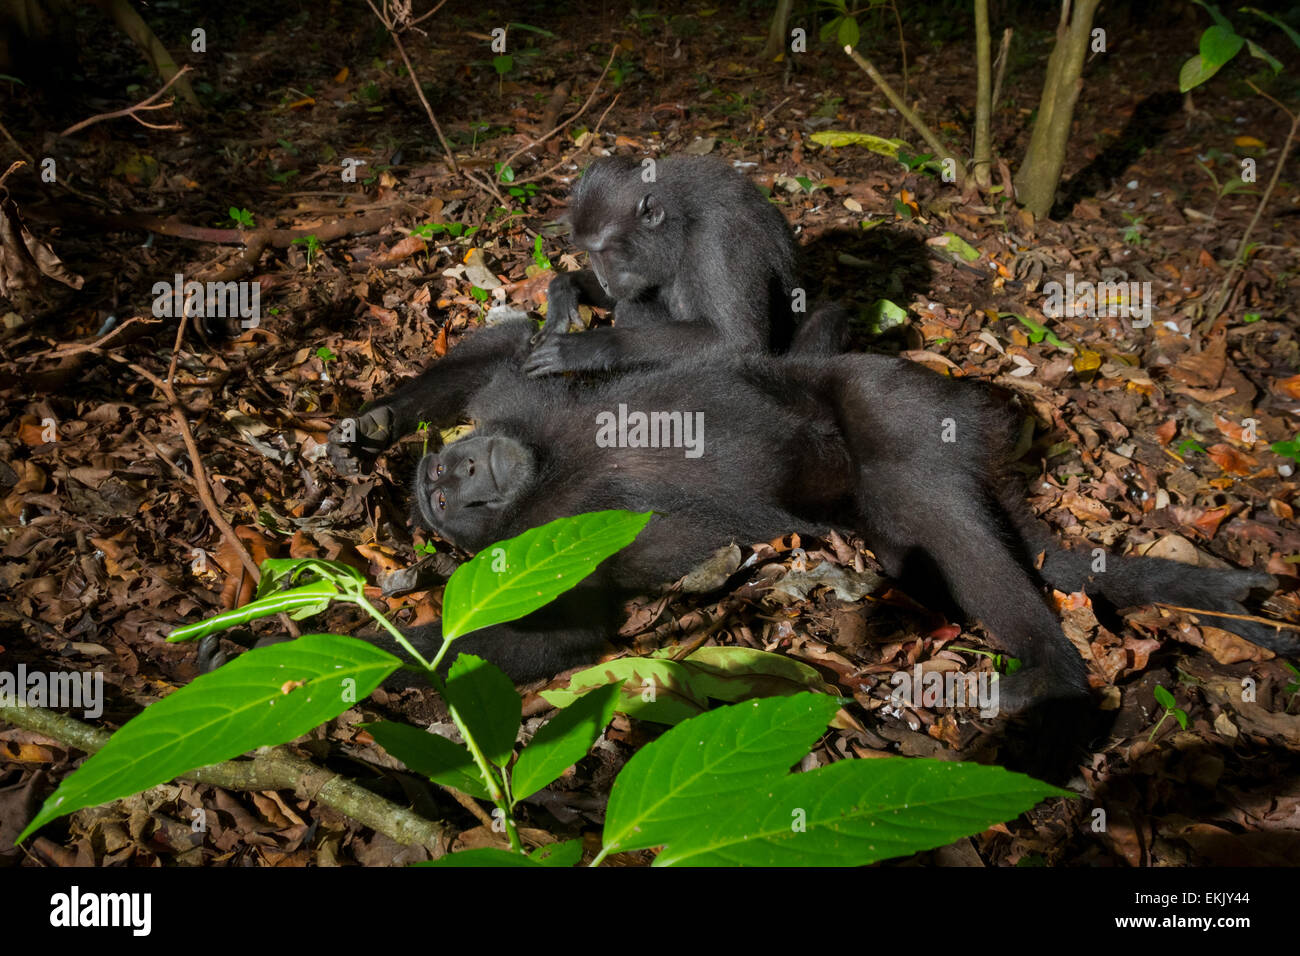 A Sulawesi black-crested macaque (Macaca nigra) is being groomed by another individual in Tangkoko Nature Reserve, North Sulawesi, Indonesia. Stock Photo